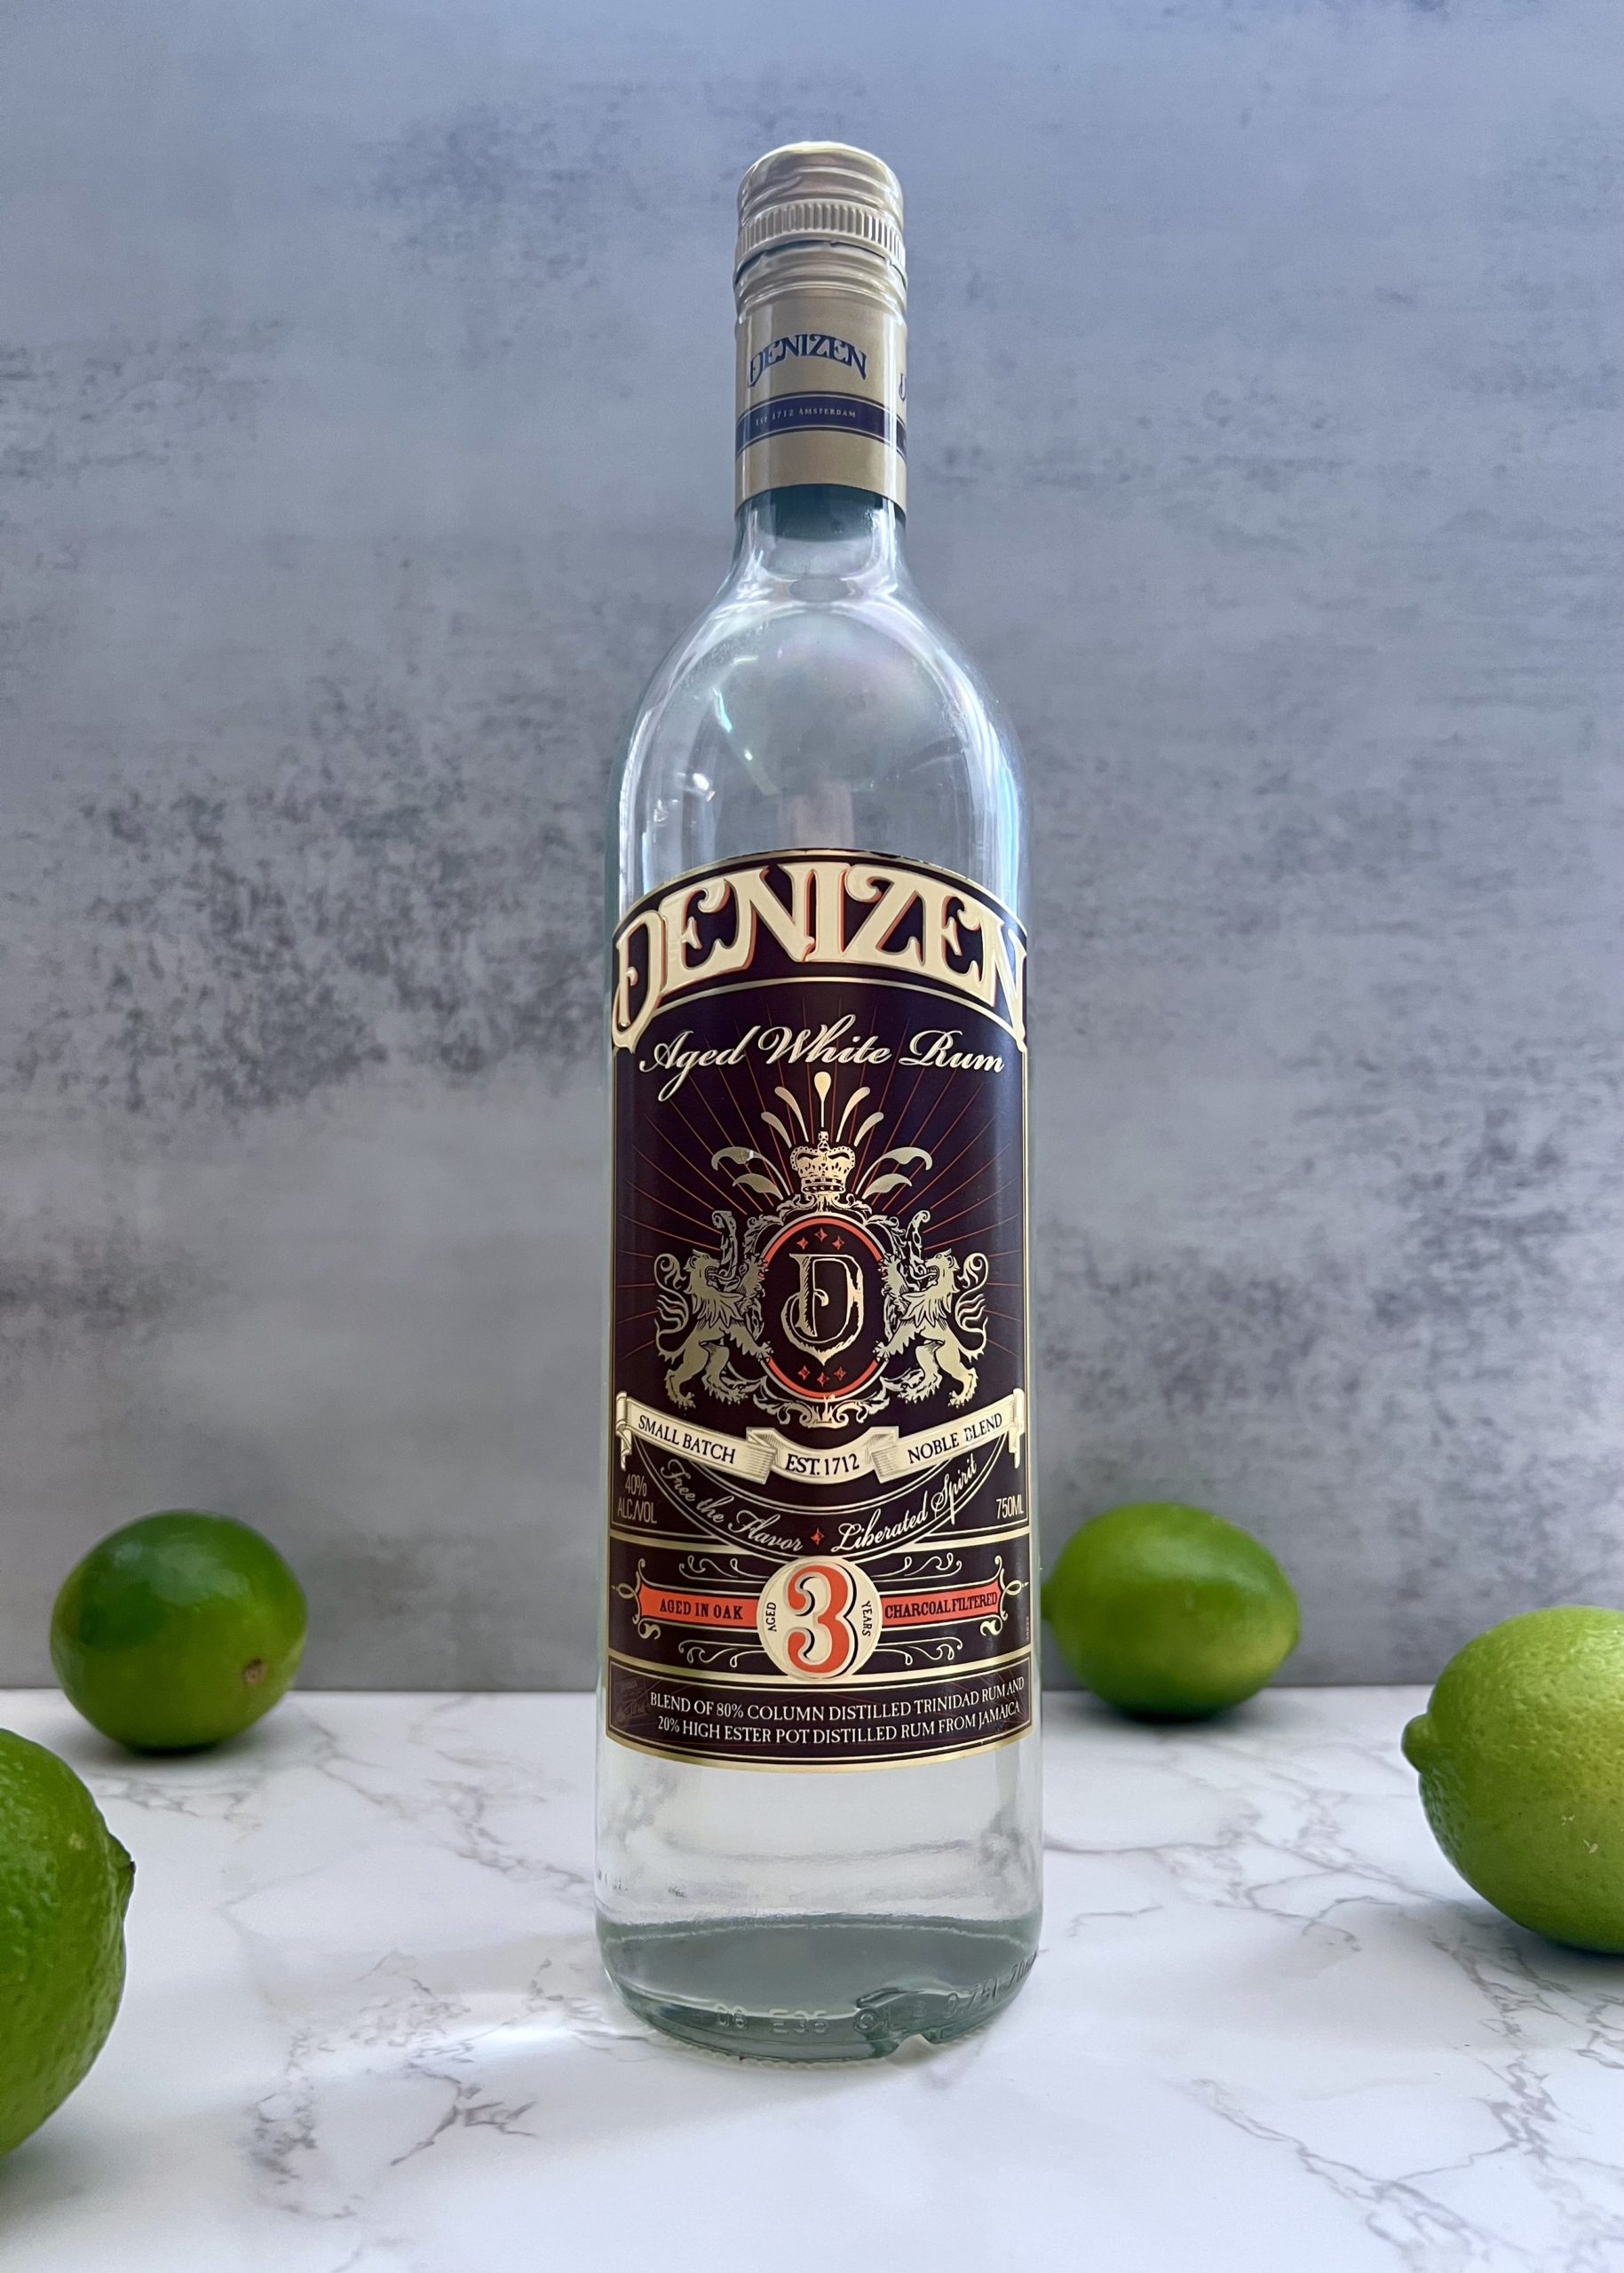 A bottle of Denizen 3 Year Aged White Rum on a counter surrounded by limes.